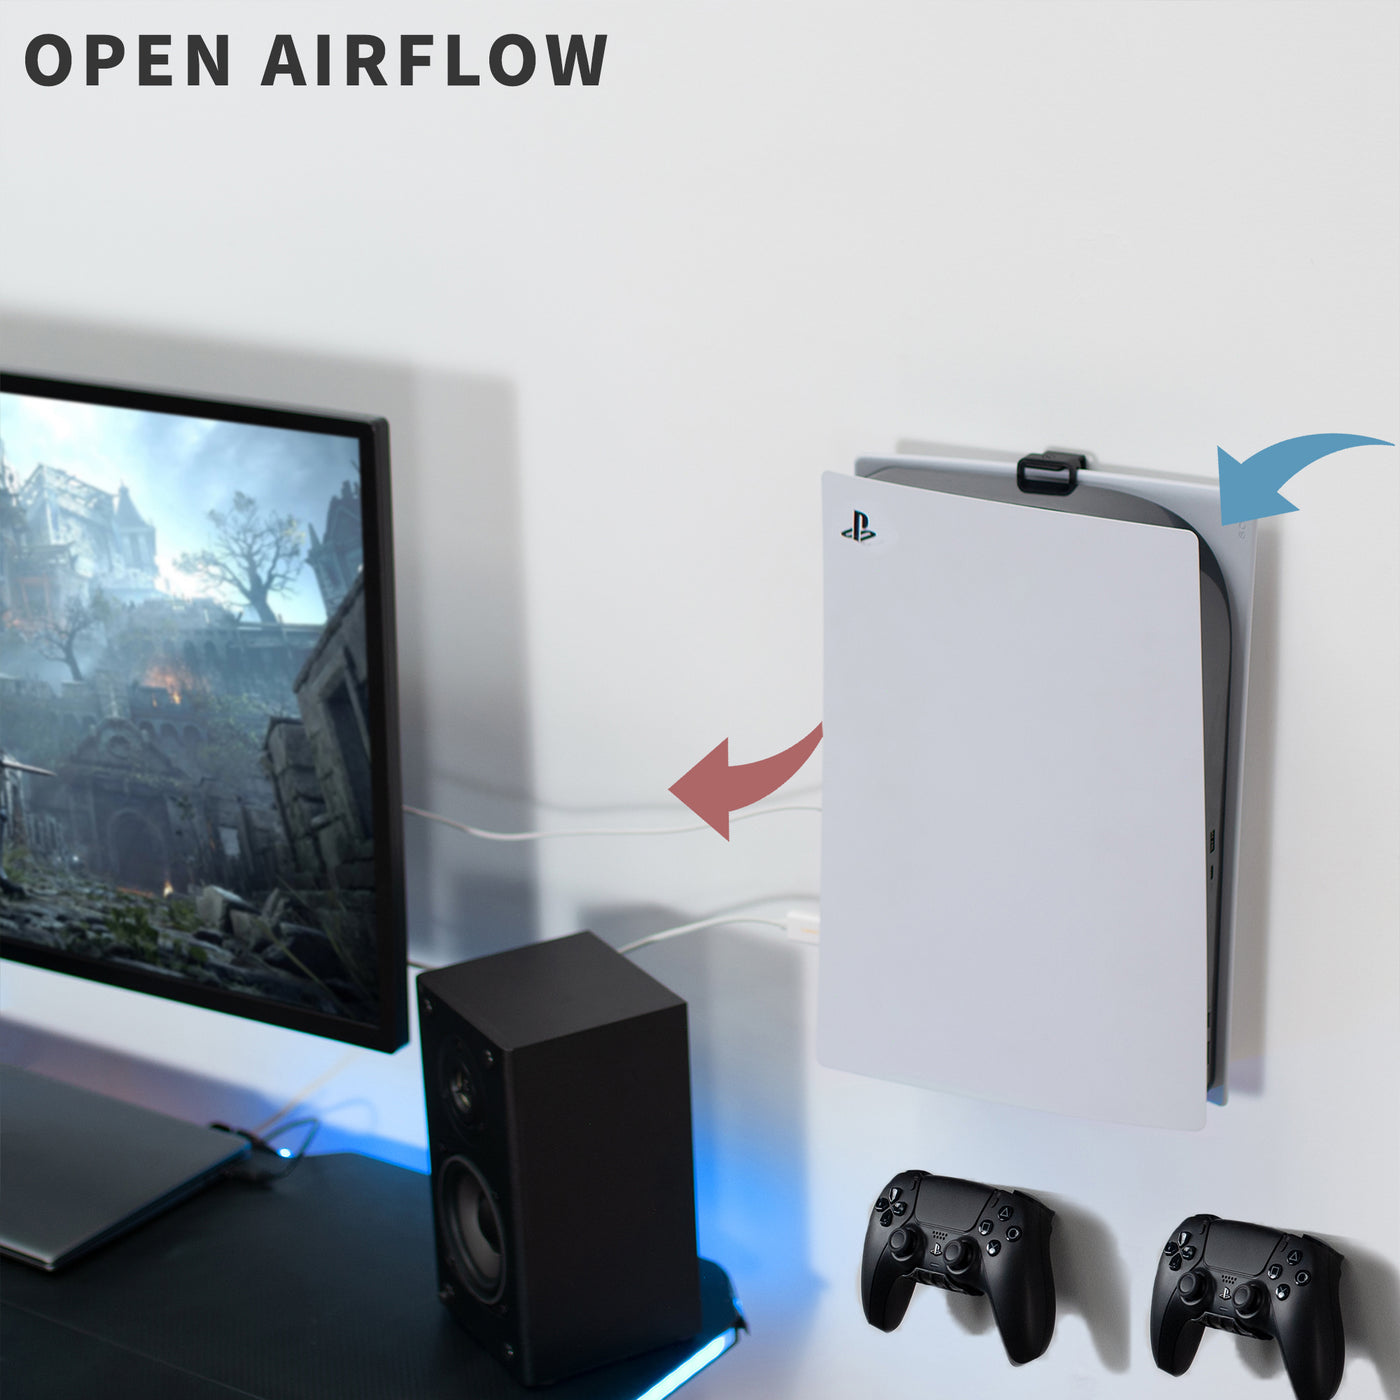 The wall mount allows for airflow to keep your Playstation from overheating.